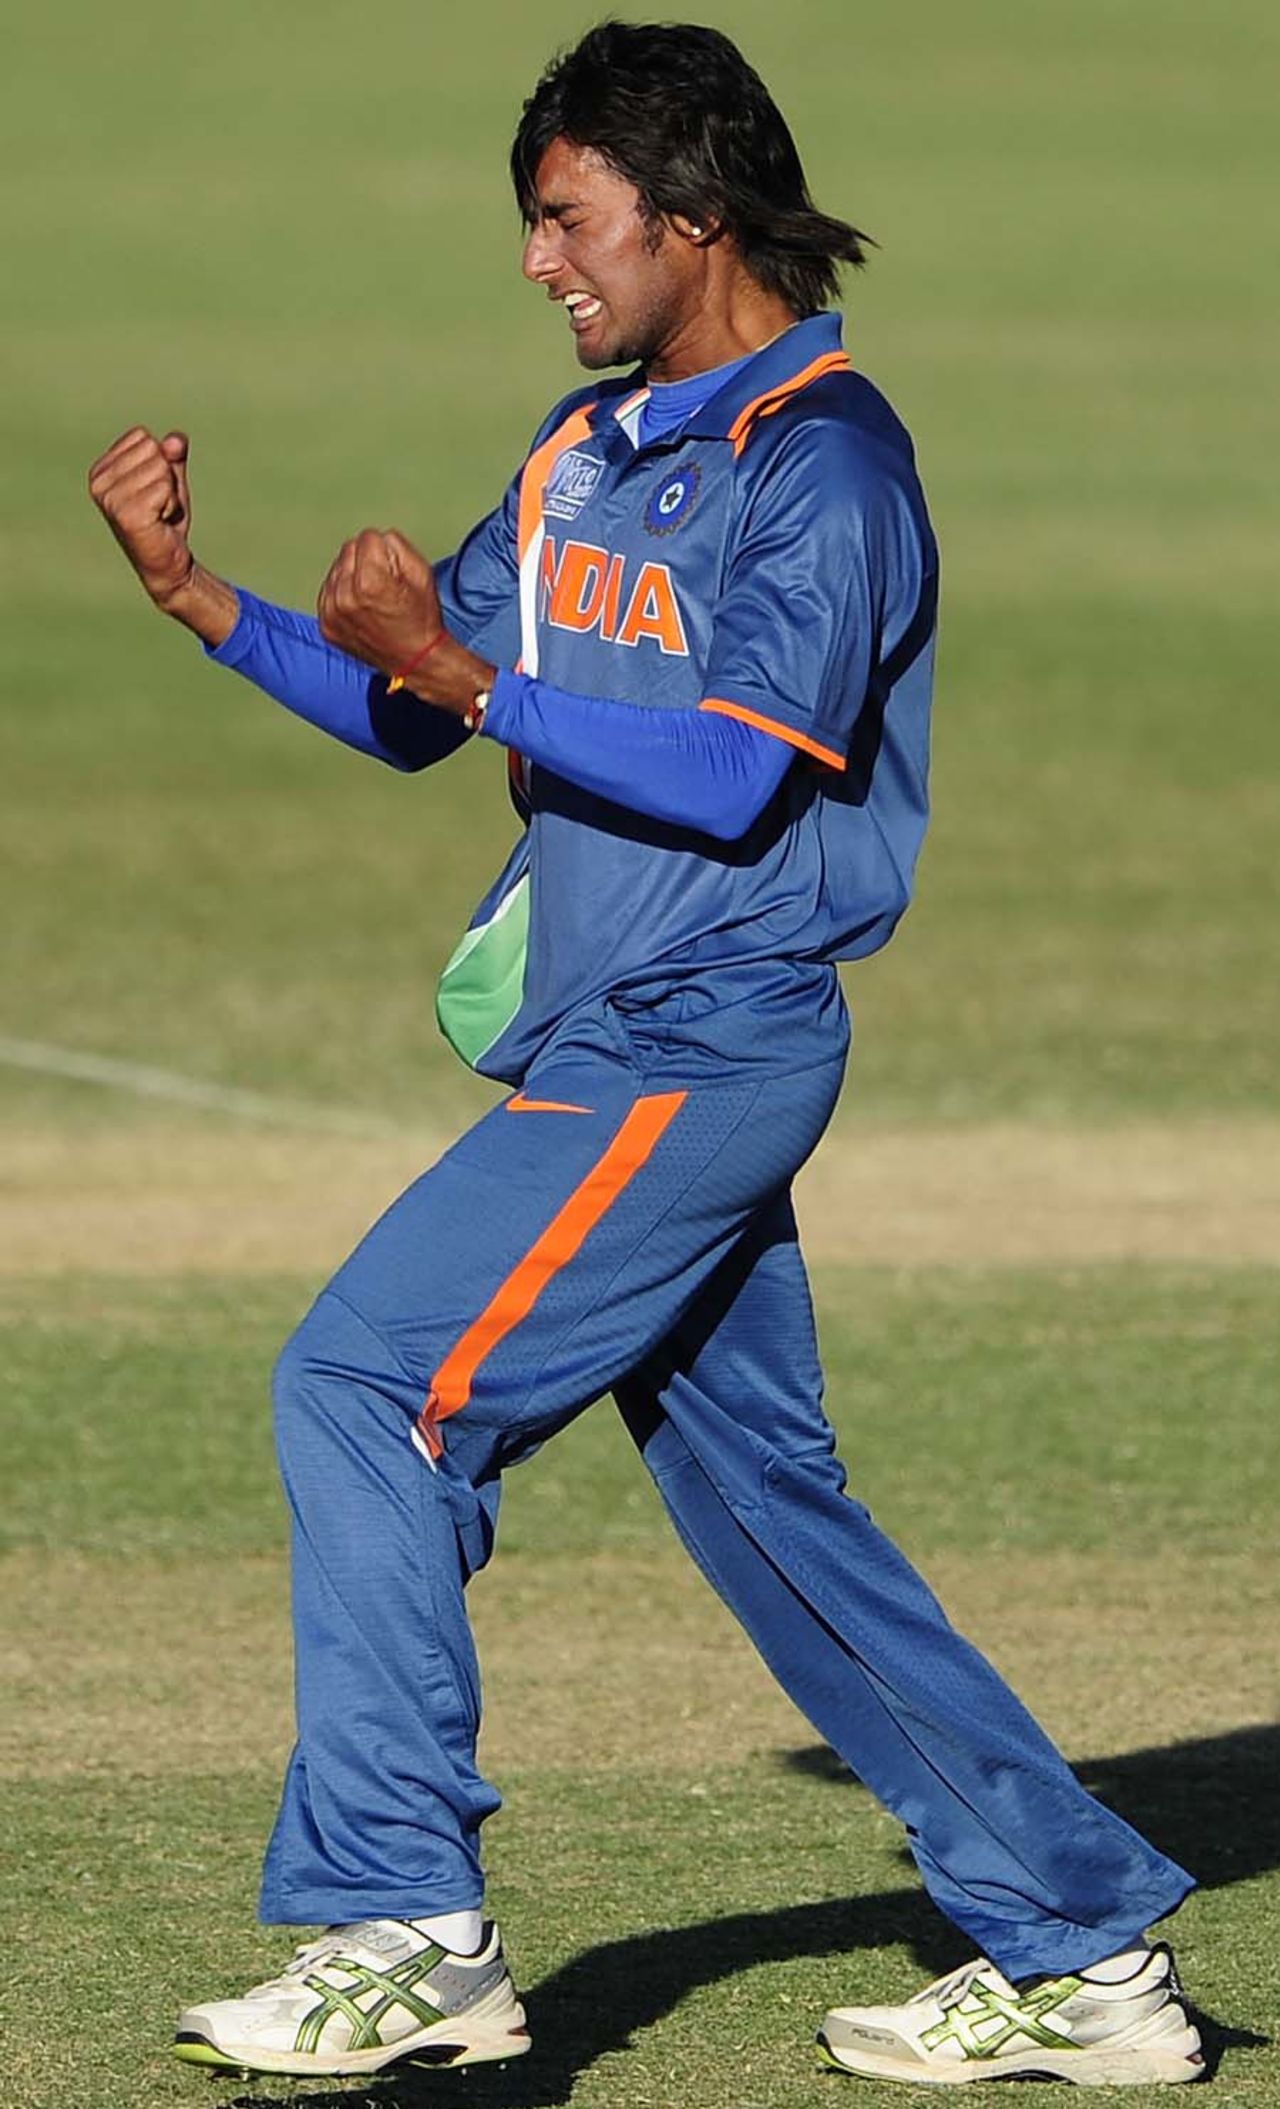 Kamal Passi reacts after taking a wicket, India v Zimbabwe, Group C, ICC Under-19 World Cup, Townsville, Aug 14, 2012